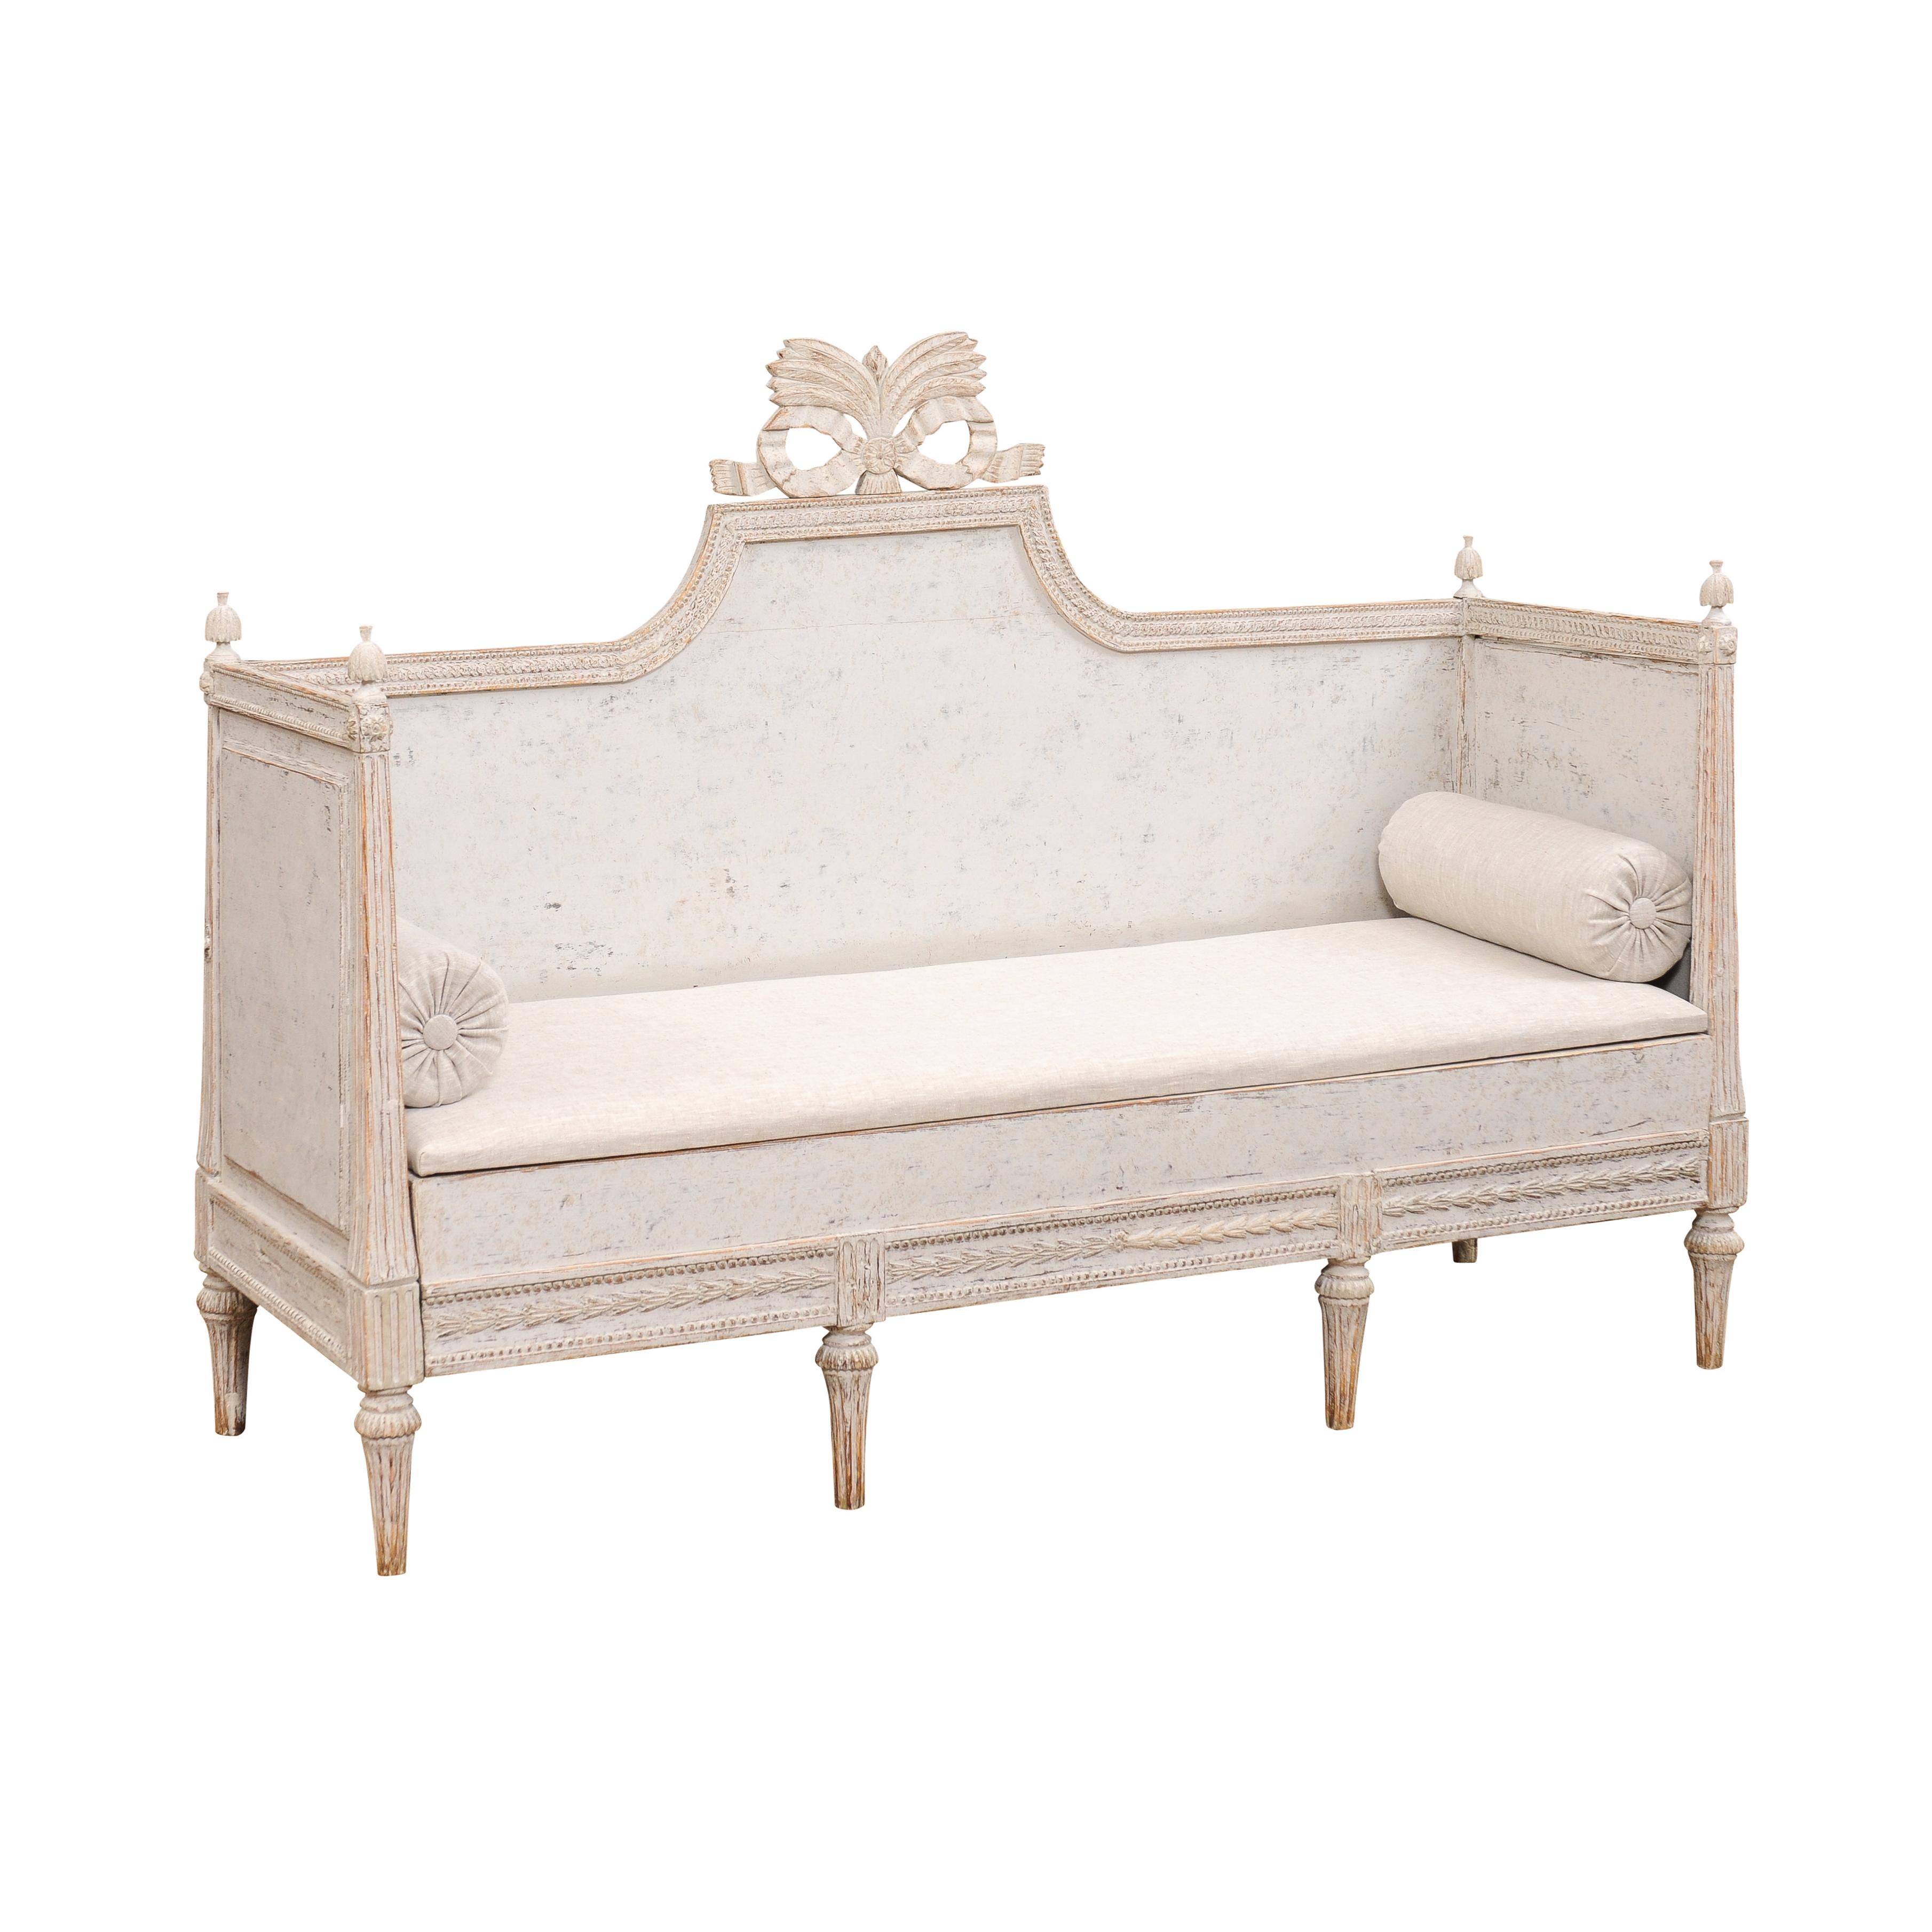 A Swedish Gustavian period painted wood sofa circa 1780 with carved crest, tall arms with finials, carved apron and cylindrical fluted legs. Step into the elegance of the Swedish Gustavian period with this exquisite painted wood sofa from the late